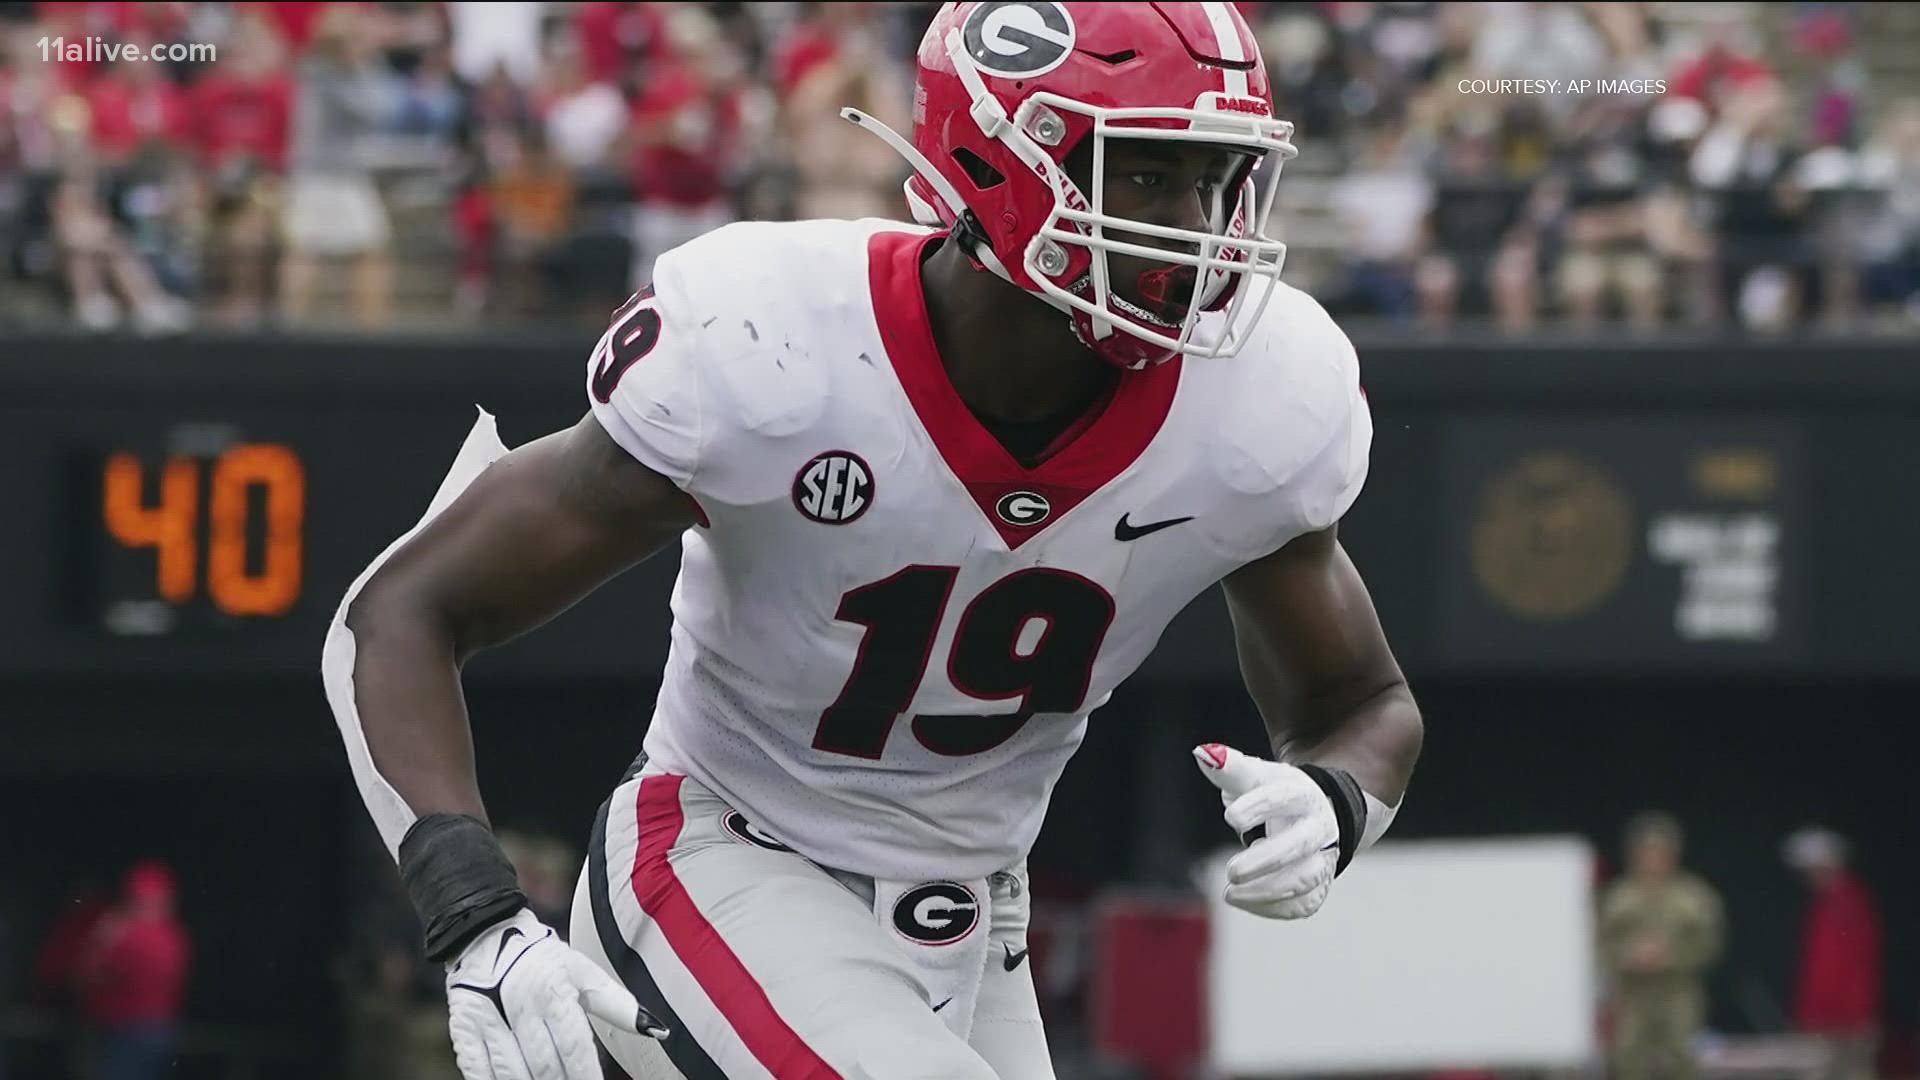 Anderson did not play this past weekend in the team's win against Missouri. As of now, UGA has yet to comment on his playing status.